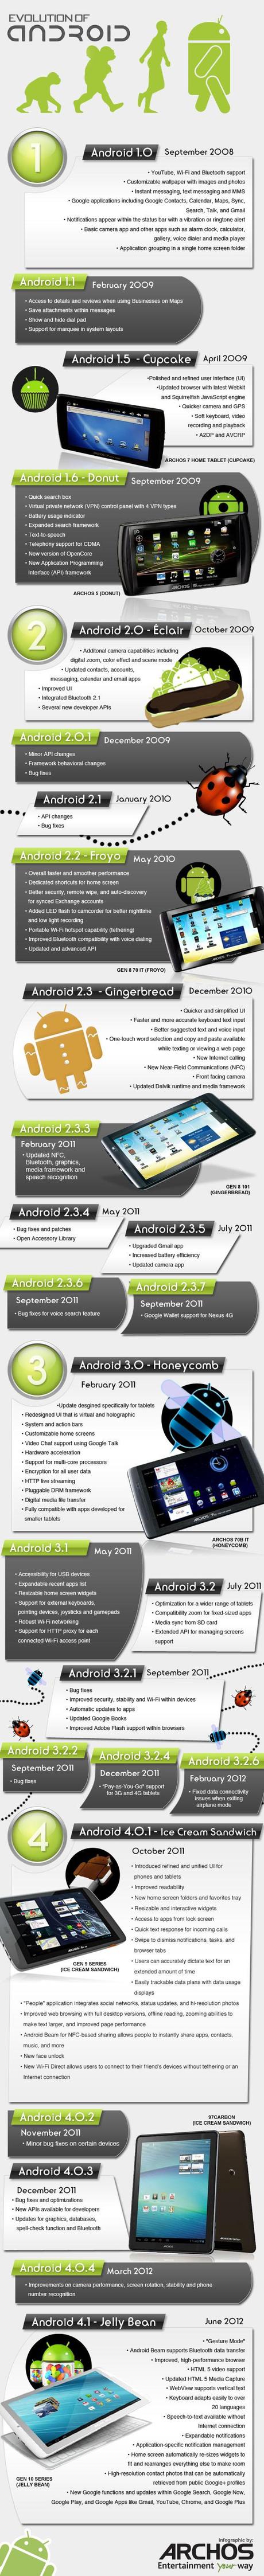 Evolution of Android